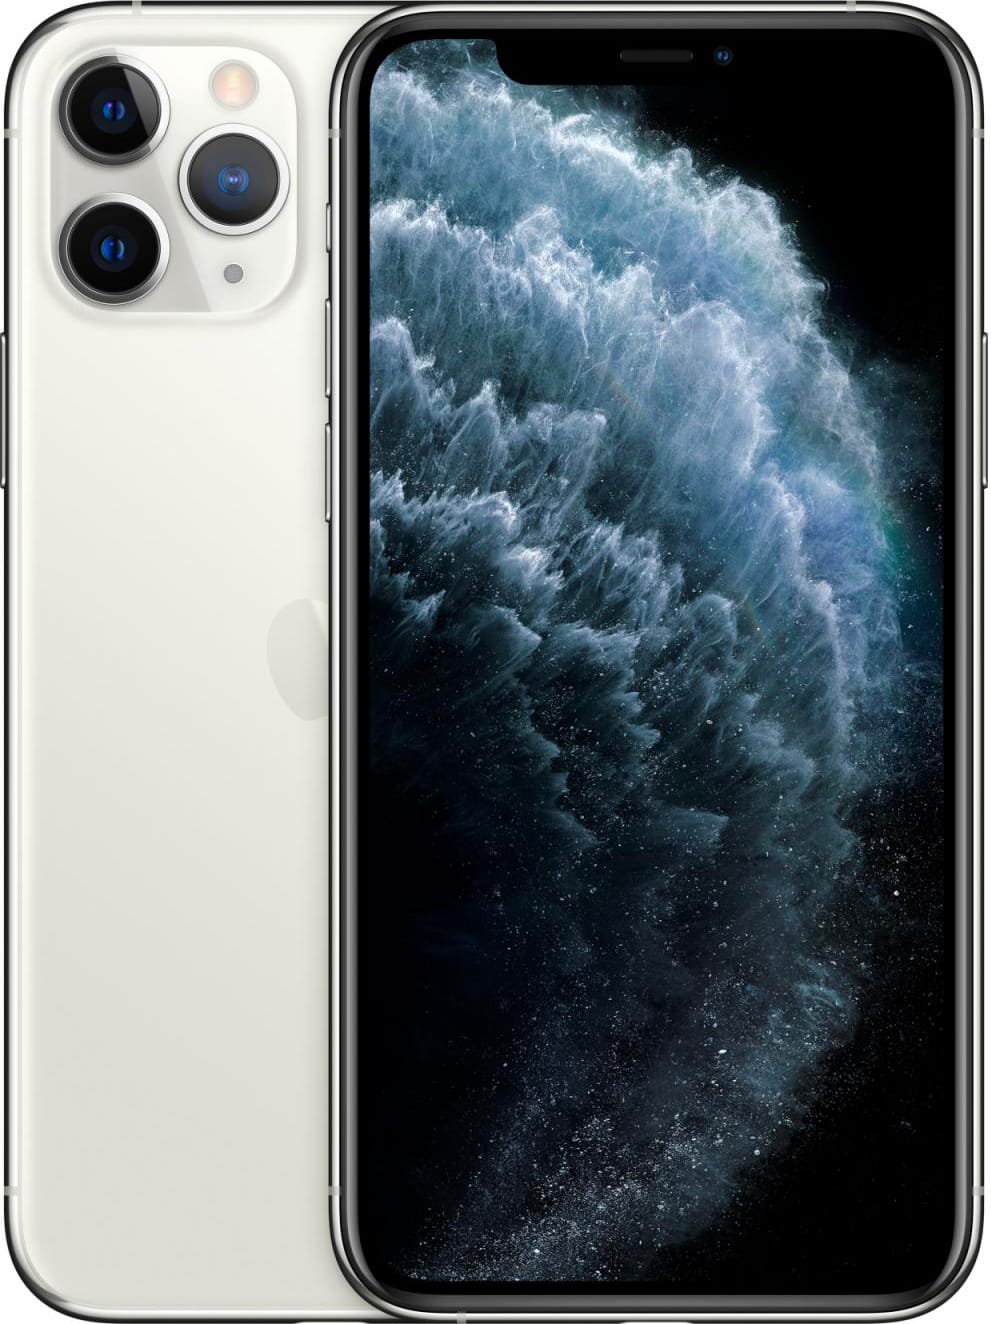 Apple Mwc32ql/a Iphone 11 Pro - Telefono Cellulare Smartphone Dual Sim Display 5.8" Touch Screen 64 Gb Fotocamera 12 Mpx 3g 4g Wifi Bluetooth Nfc Gps Ios 13 Colore Argento - Mwc32ql/a